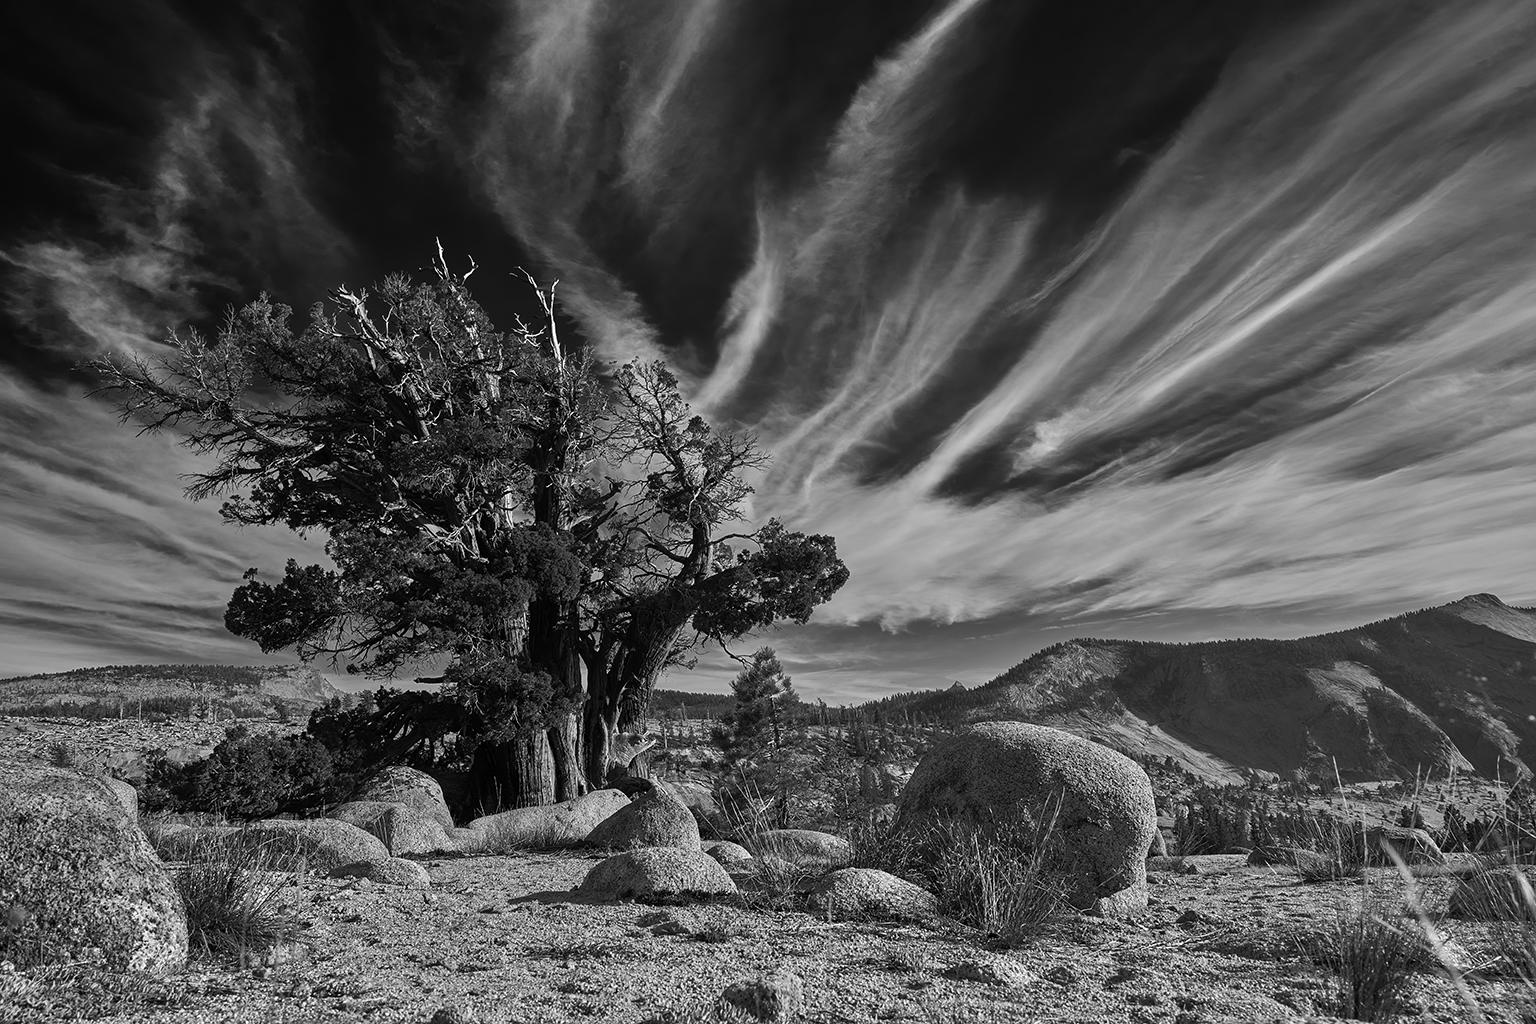 Frank Schott Black and White Photograph - Tree Study III - large format b/w photograph of lone ancient tree in landscape